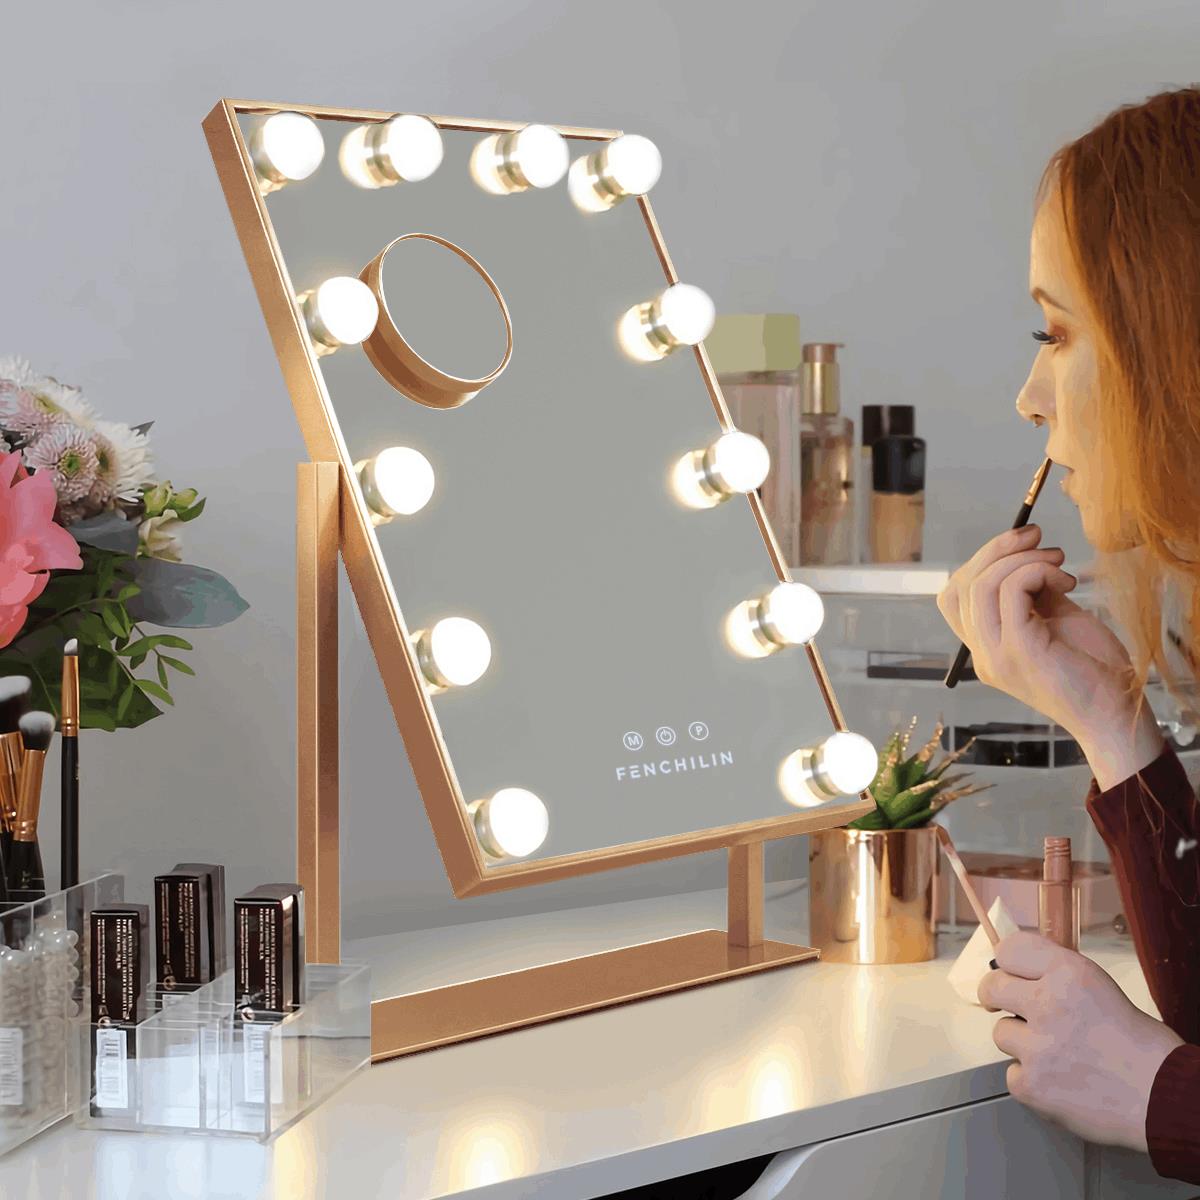 https://www.fenchilin.com/cdn/shop/products/bottom-pricehollywood-silm-vanity-mirror-l-145x185-12-dimmable-led-bulbs-fenchilin-402614.jpg?v=1645155698